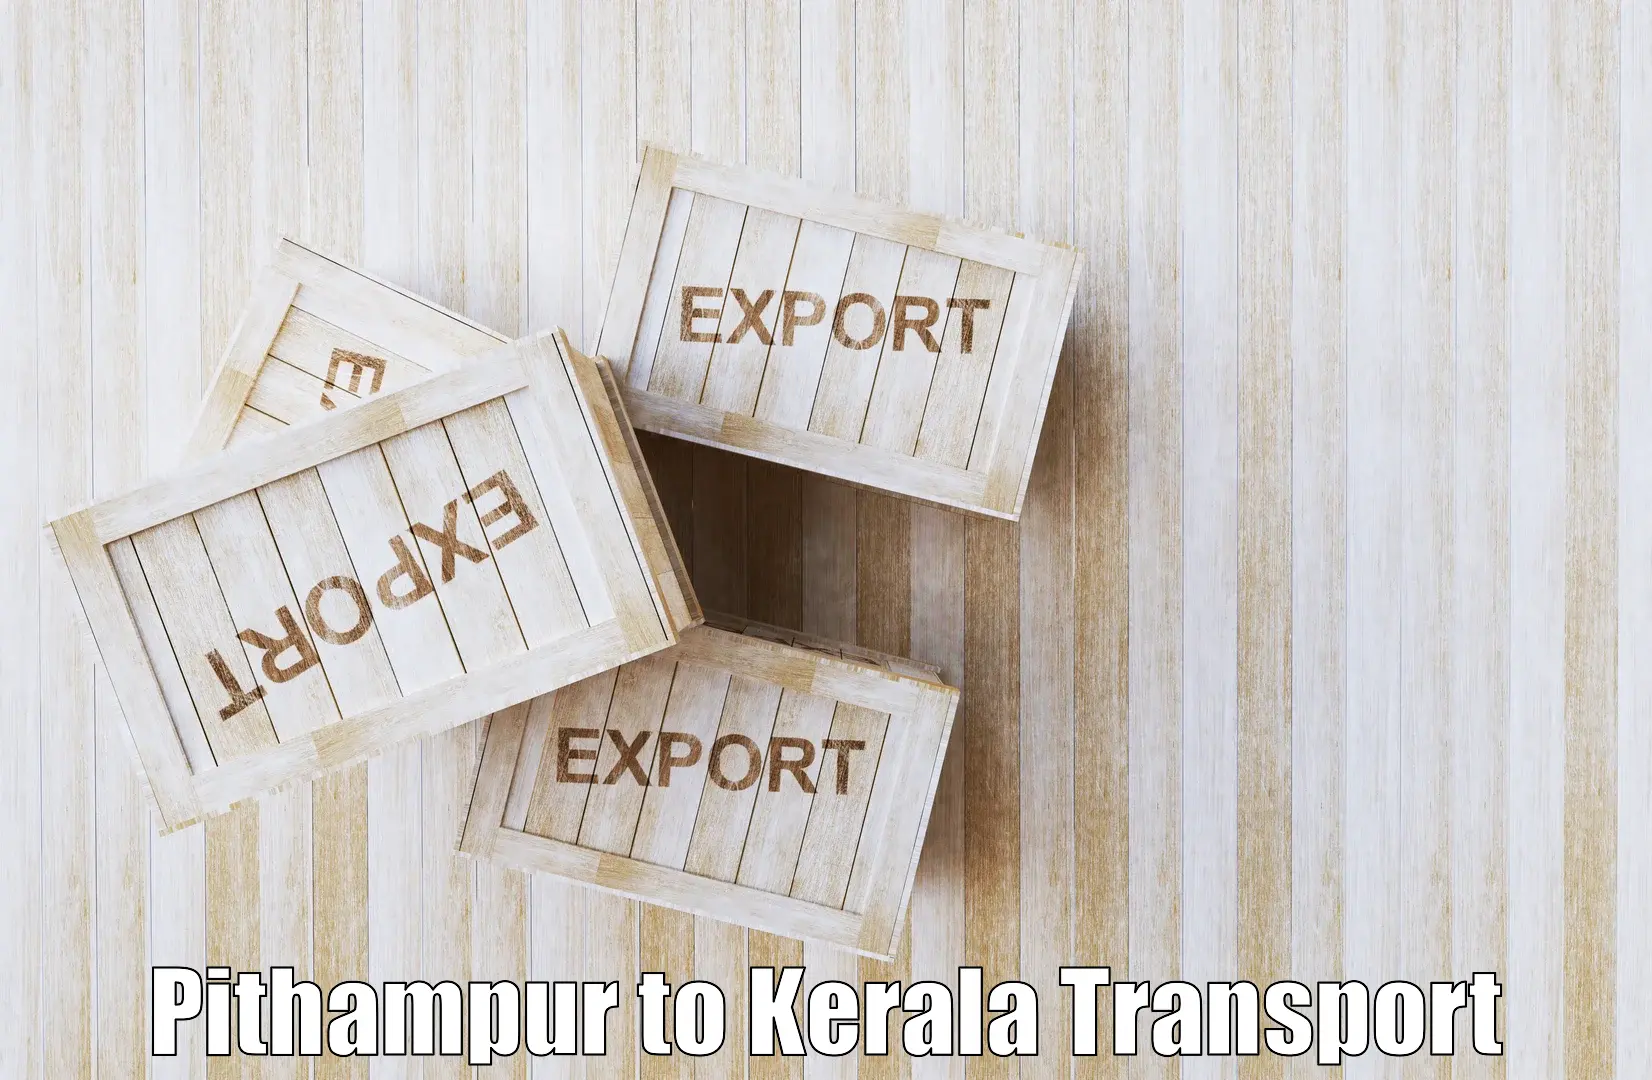 Cargo train transport services Pithampur to Ernakulam